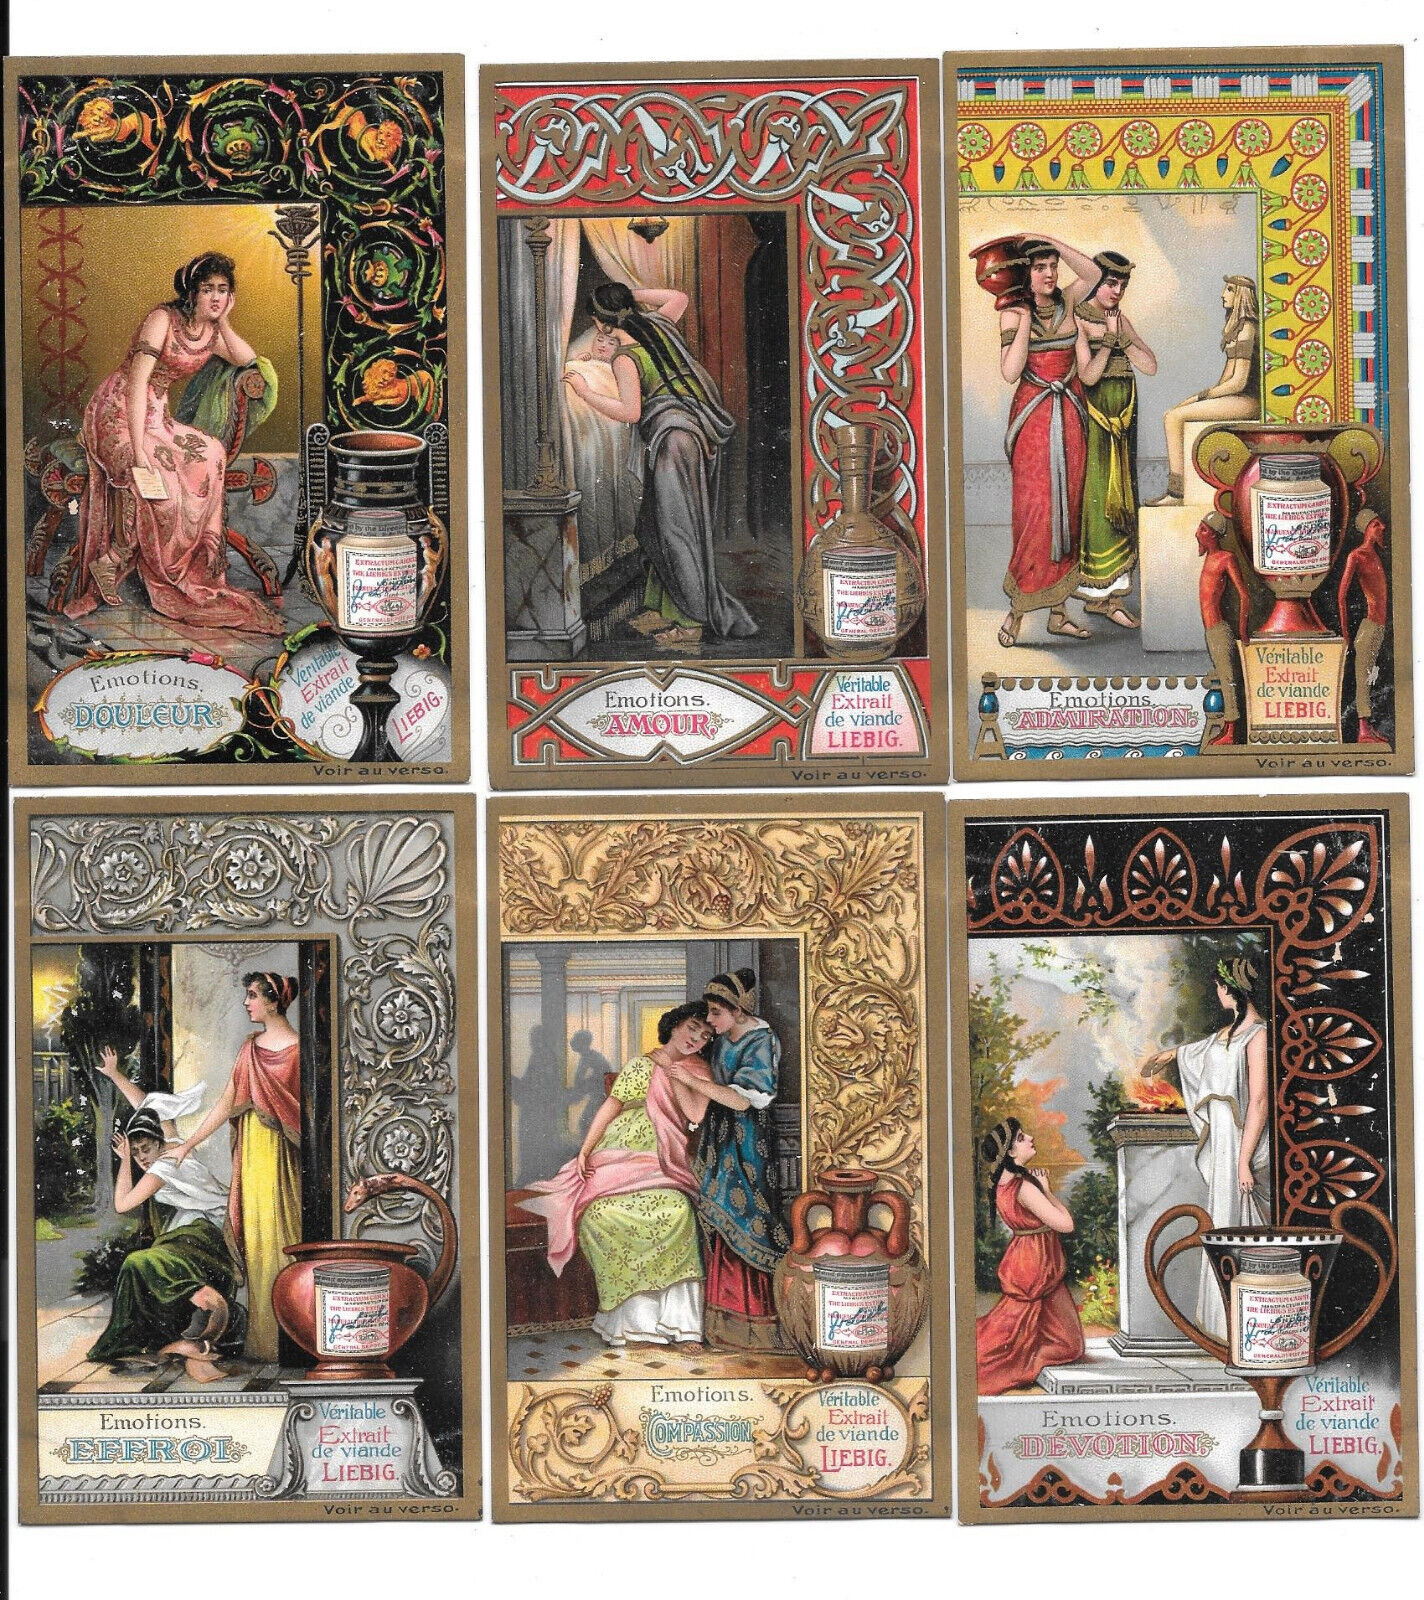 LIEBIG TRADE CARDS, THE EMOTIONS 1905 Set of 6 Cards (S812 French).